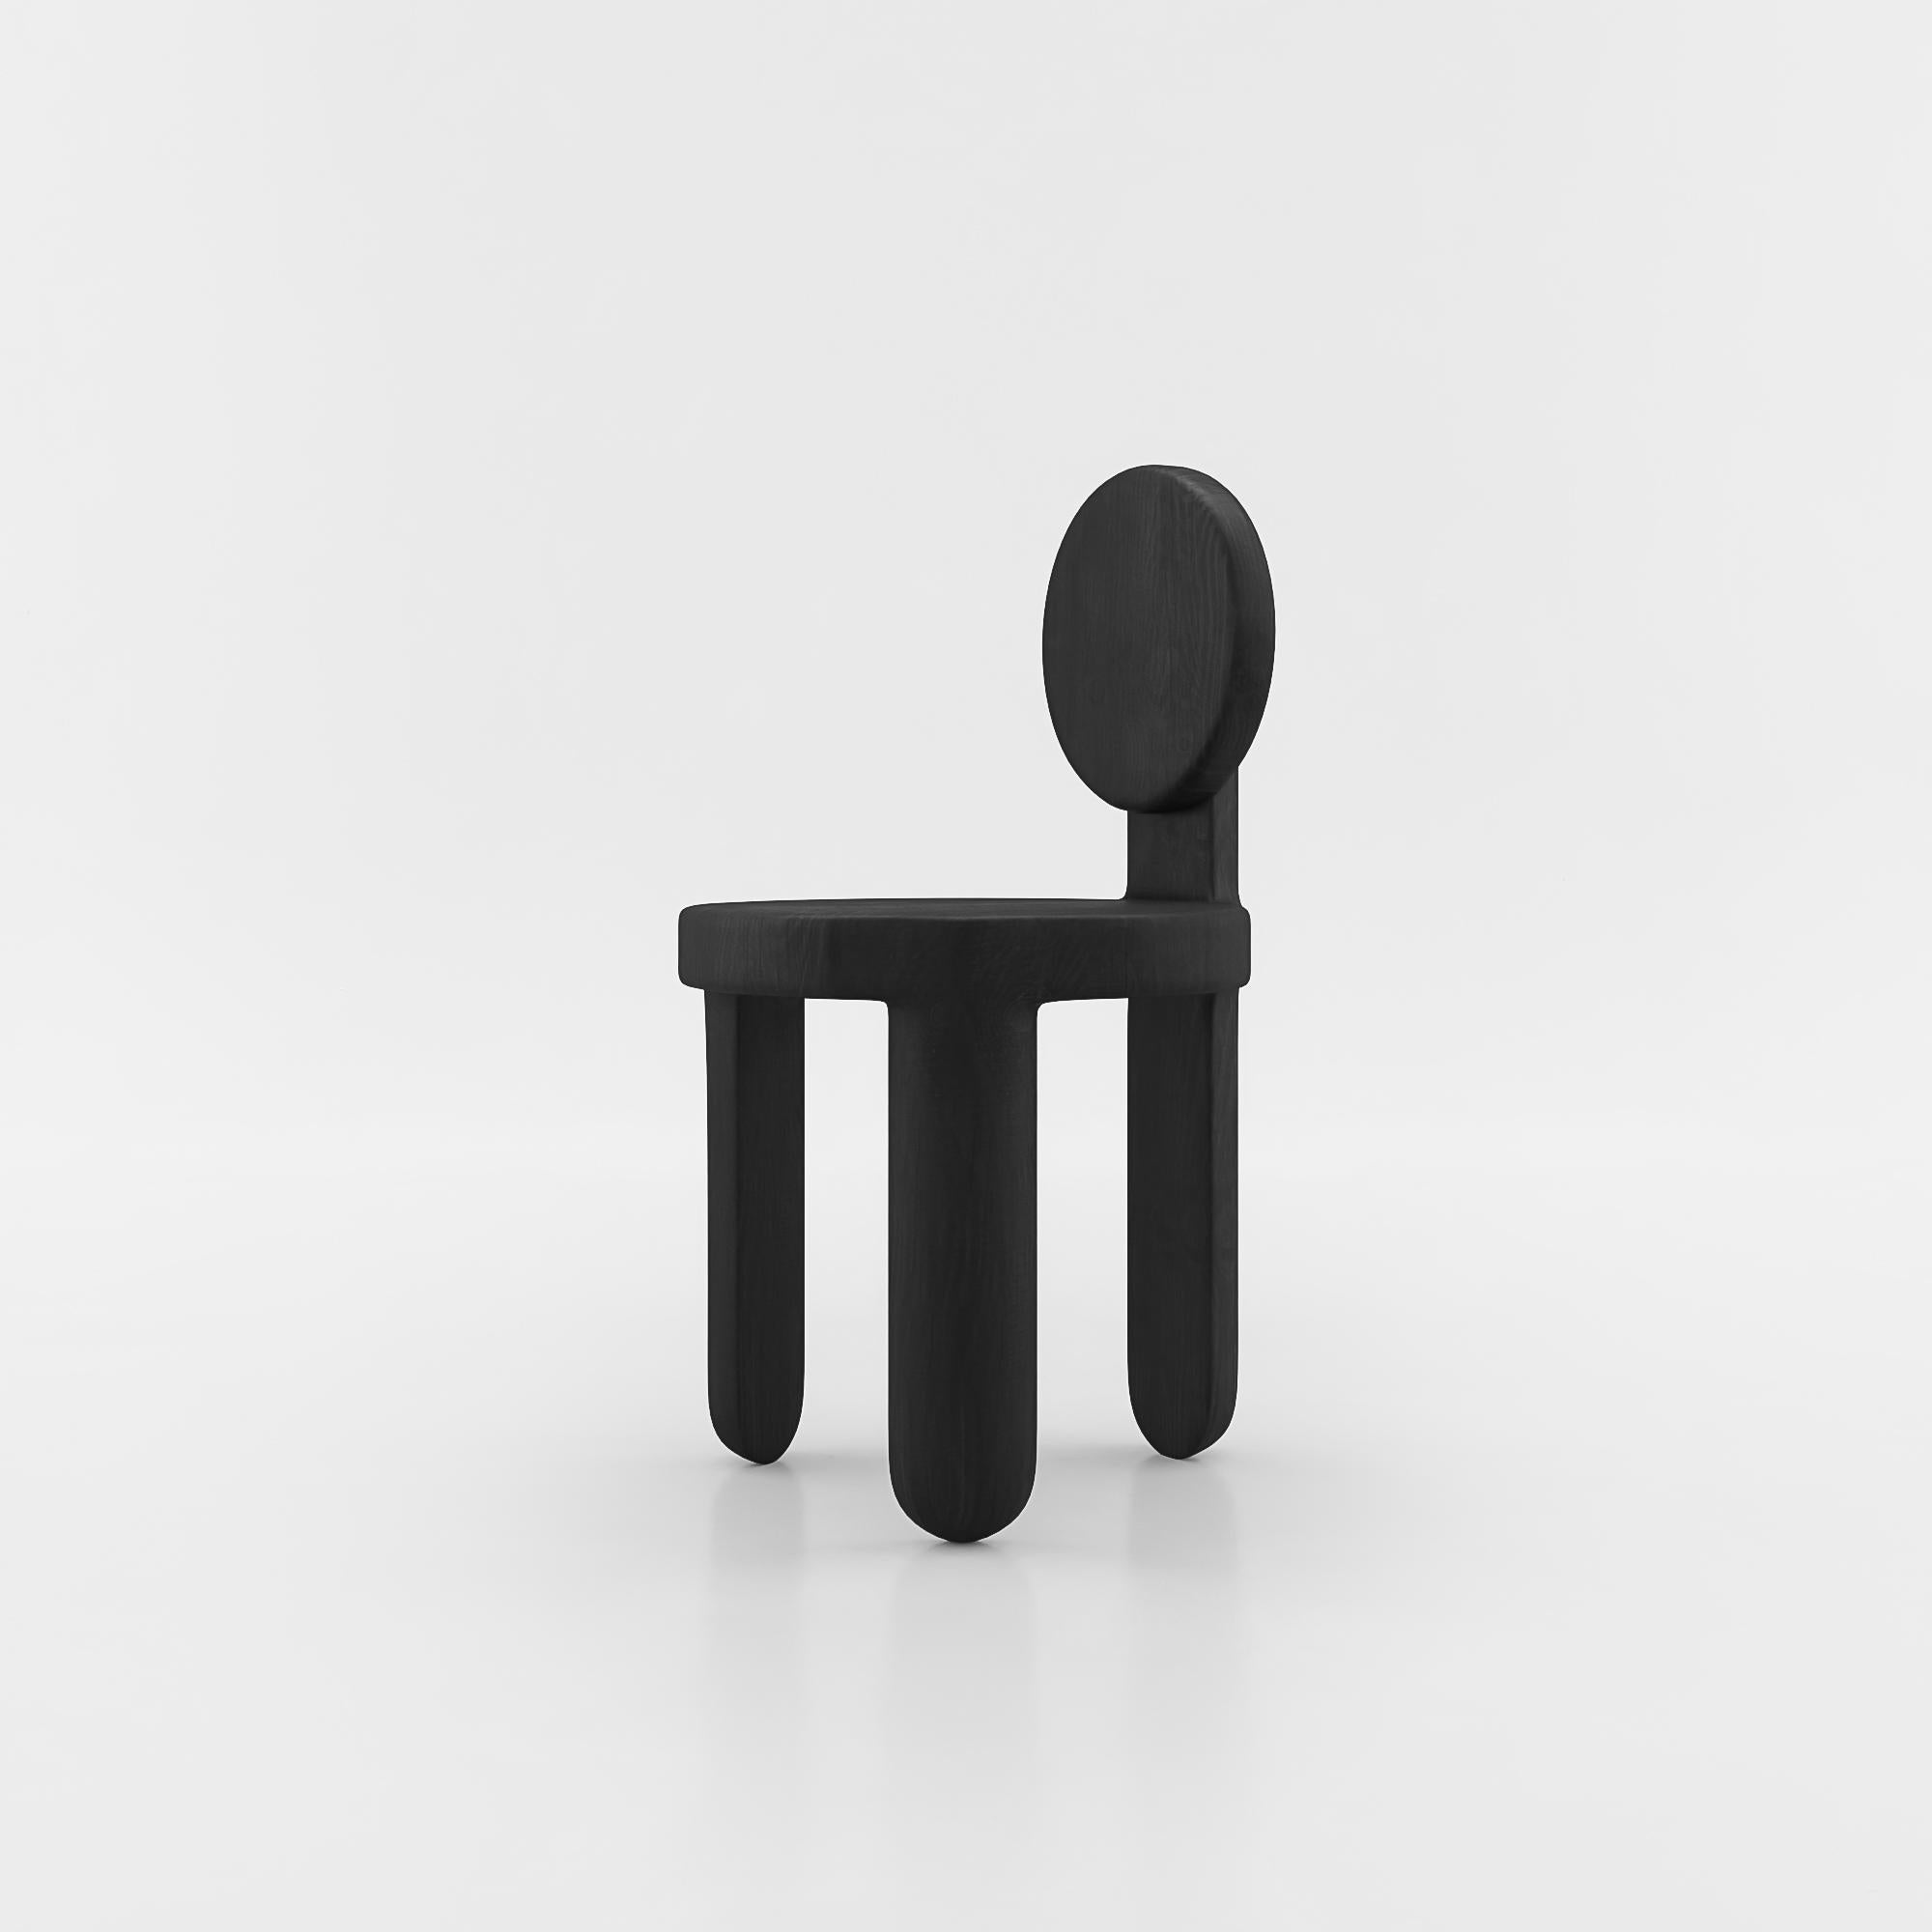 Three-legged chair by Vladimir Naumov
Dimensions: H 80 x W 45 x L 47 cm
Materials: Black oak

Vladimir Naumov is a professional architect, designer and artist.
While designing the furniture he tries to reach the perfect bled of forms and materials